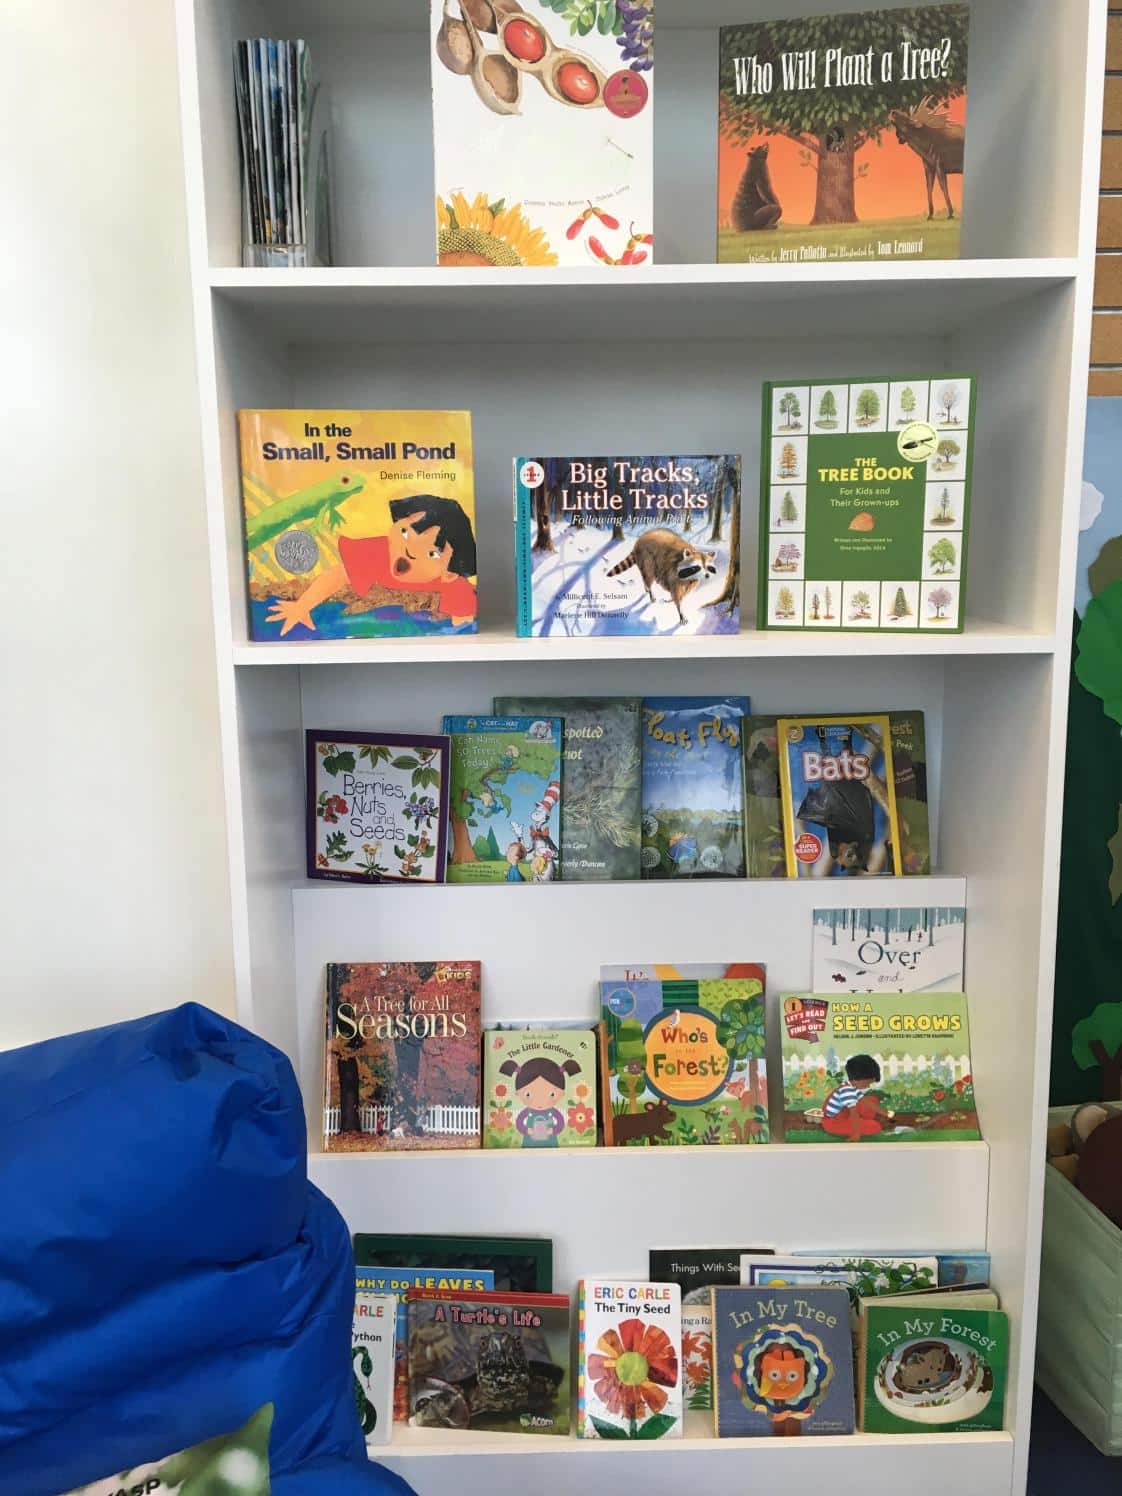 Bookshelf with childrens picture books about the woods.